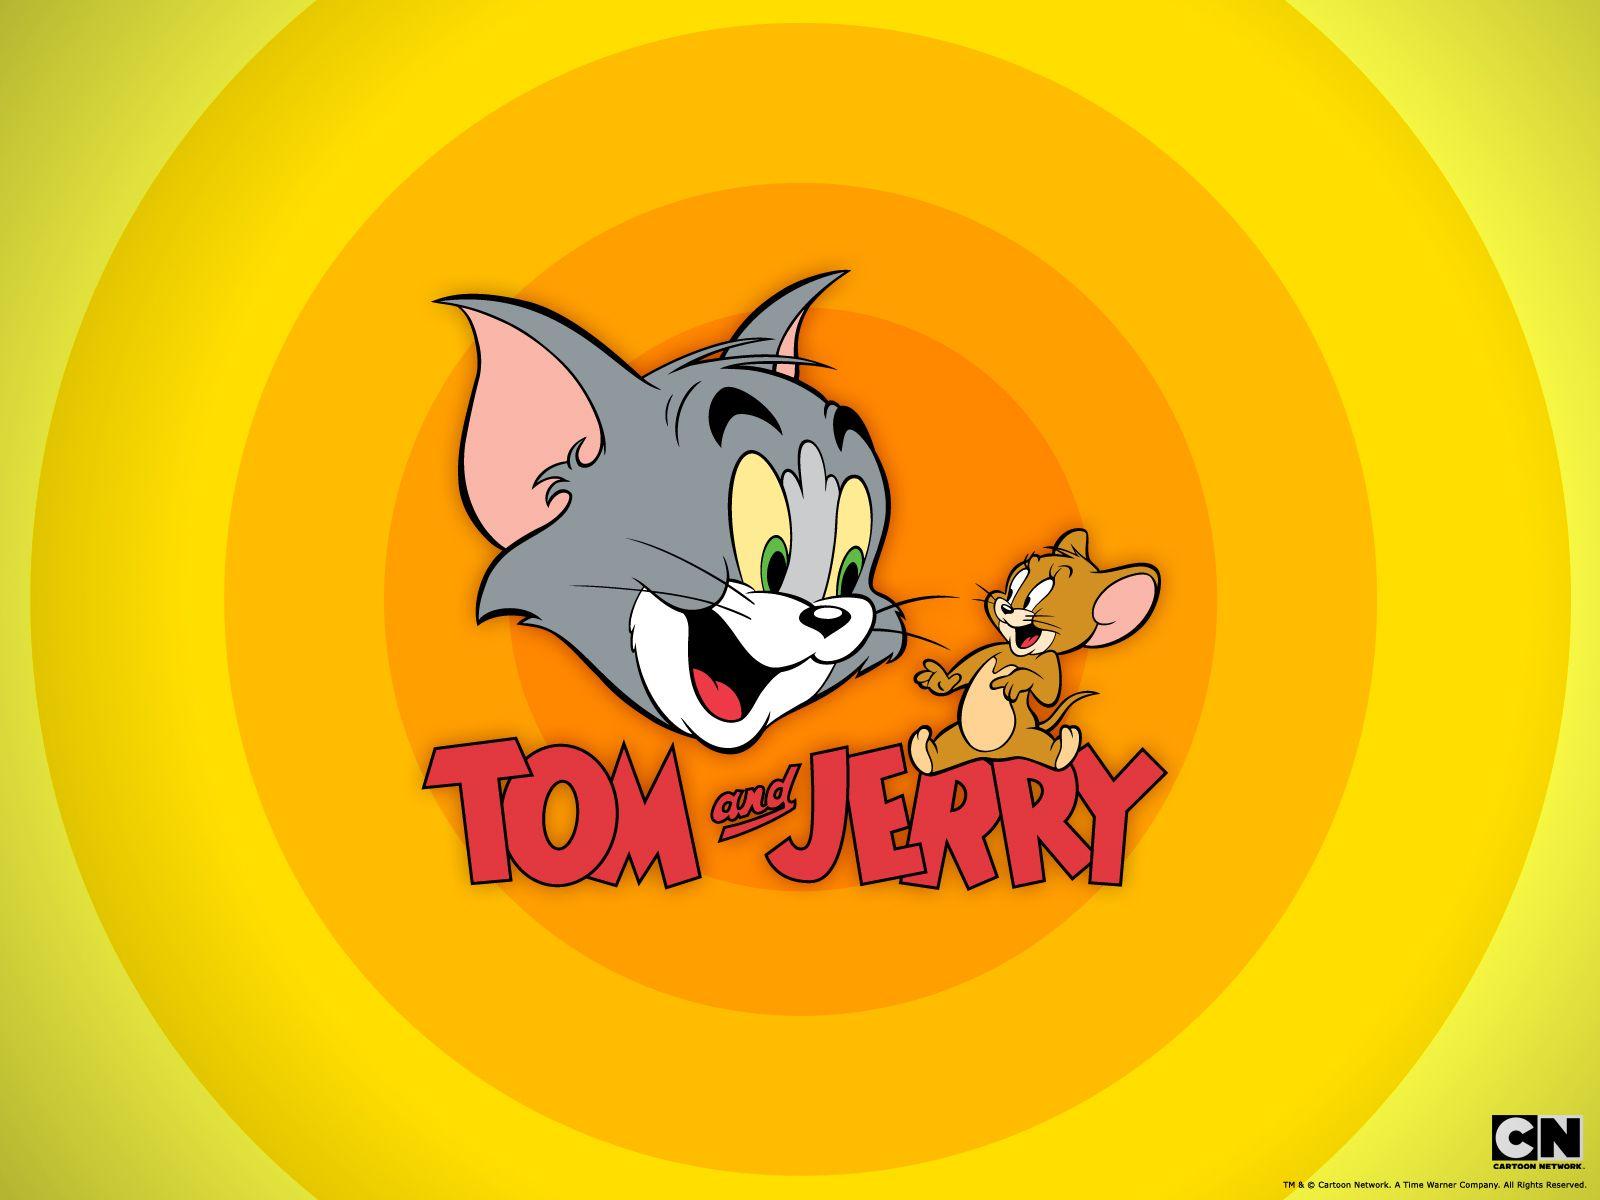 Tom and Jerry Boomerang Logo - Tom and Jerry. Free Picture and Wallpaper Downloads